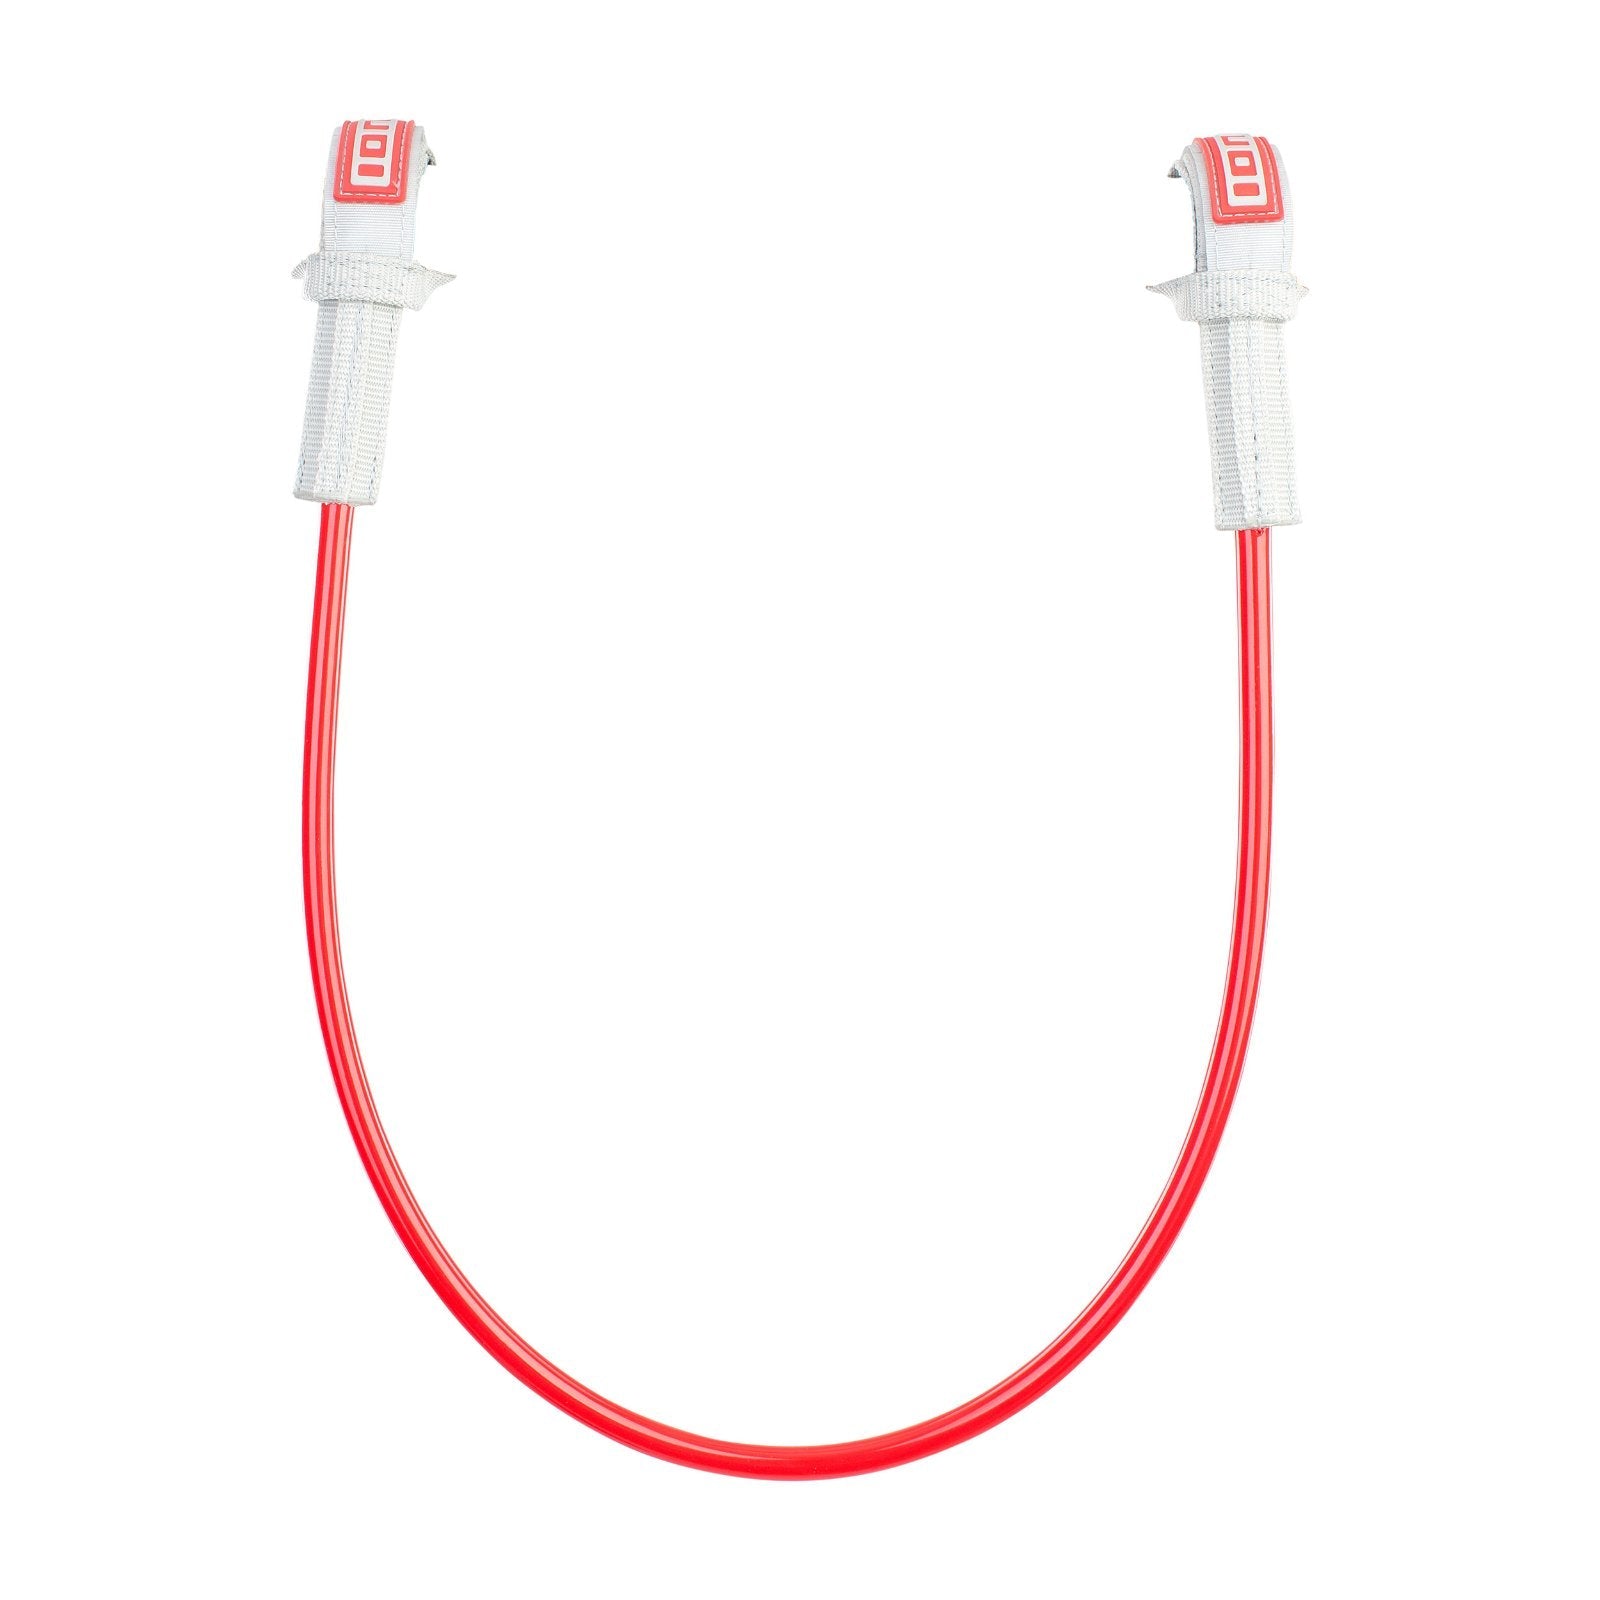 ION Windsurf Harness Line 2024-ION Water-22'-red-48210-7072-9008415960620-Surf-store.com